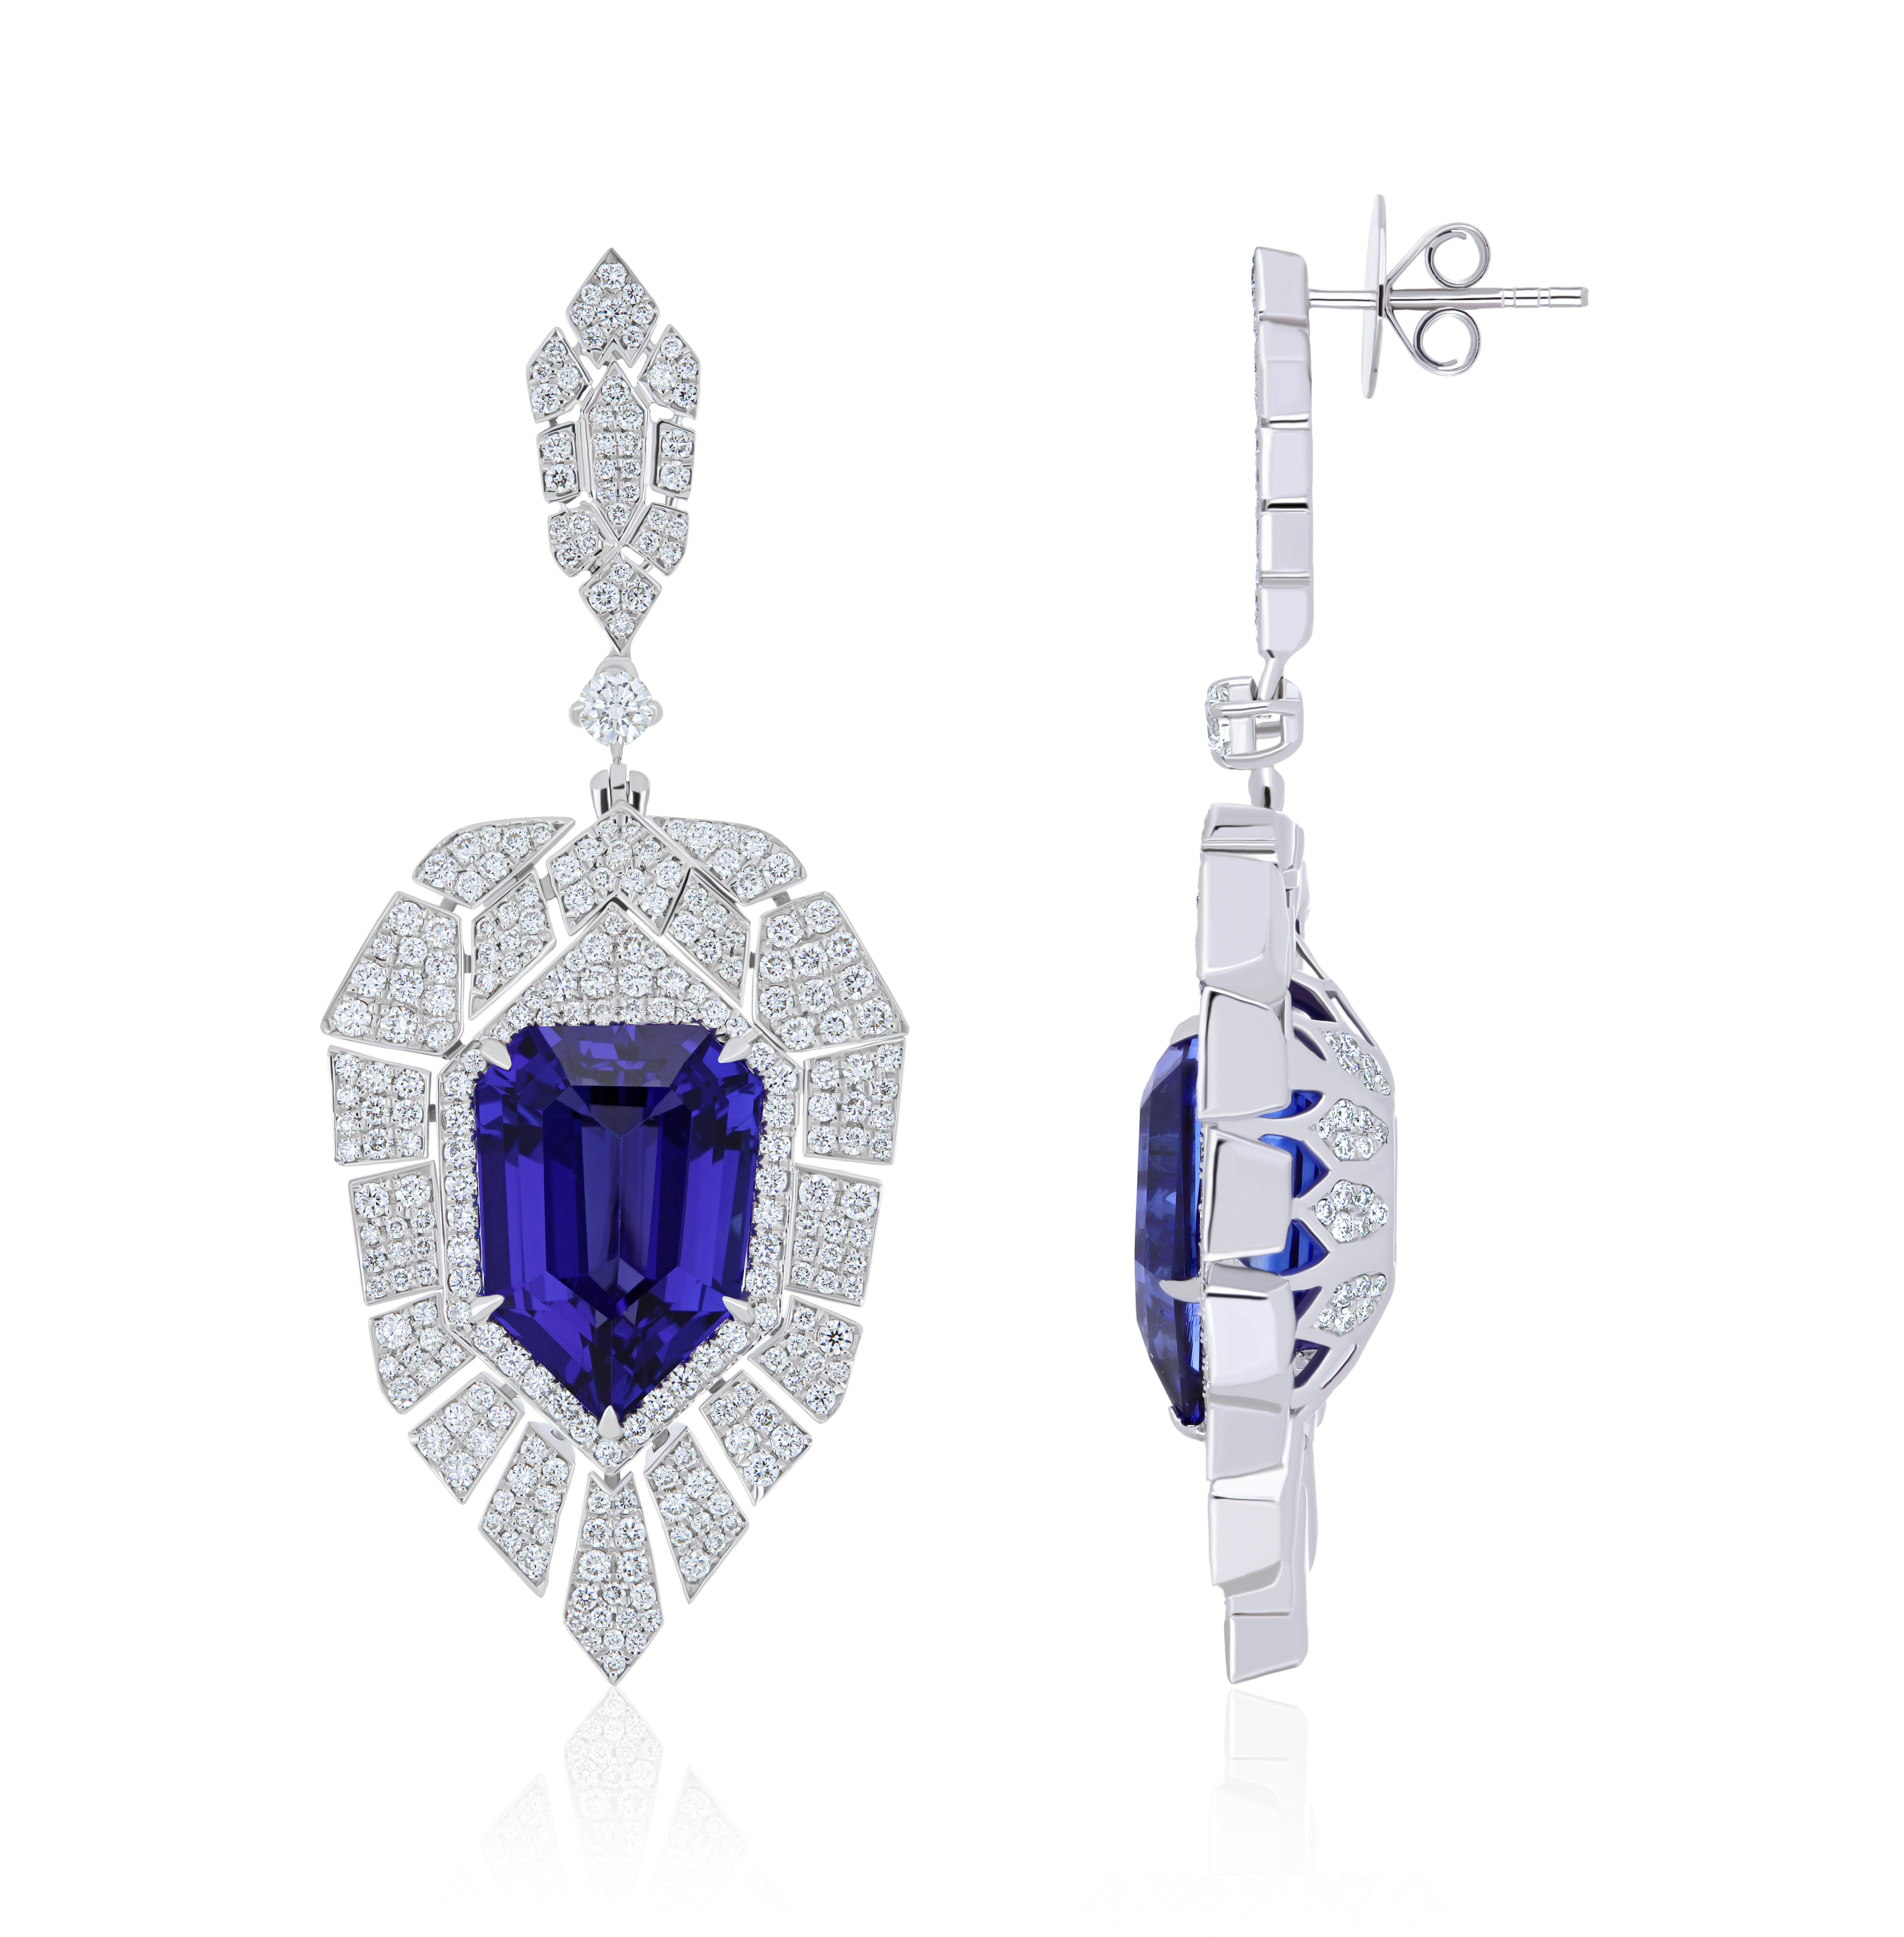 Elegant and Exquisitely detailed White Gold Earring, with 22.07cts. (approx.) Tanzanite cut in Unique Fancy Shield Shape accented with micro pave Diamonds, weighing approx. 3.4 cts. (approx.). total carat weight. Beautifully Hand-Crafted Earring in